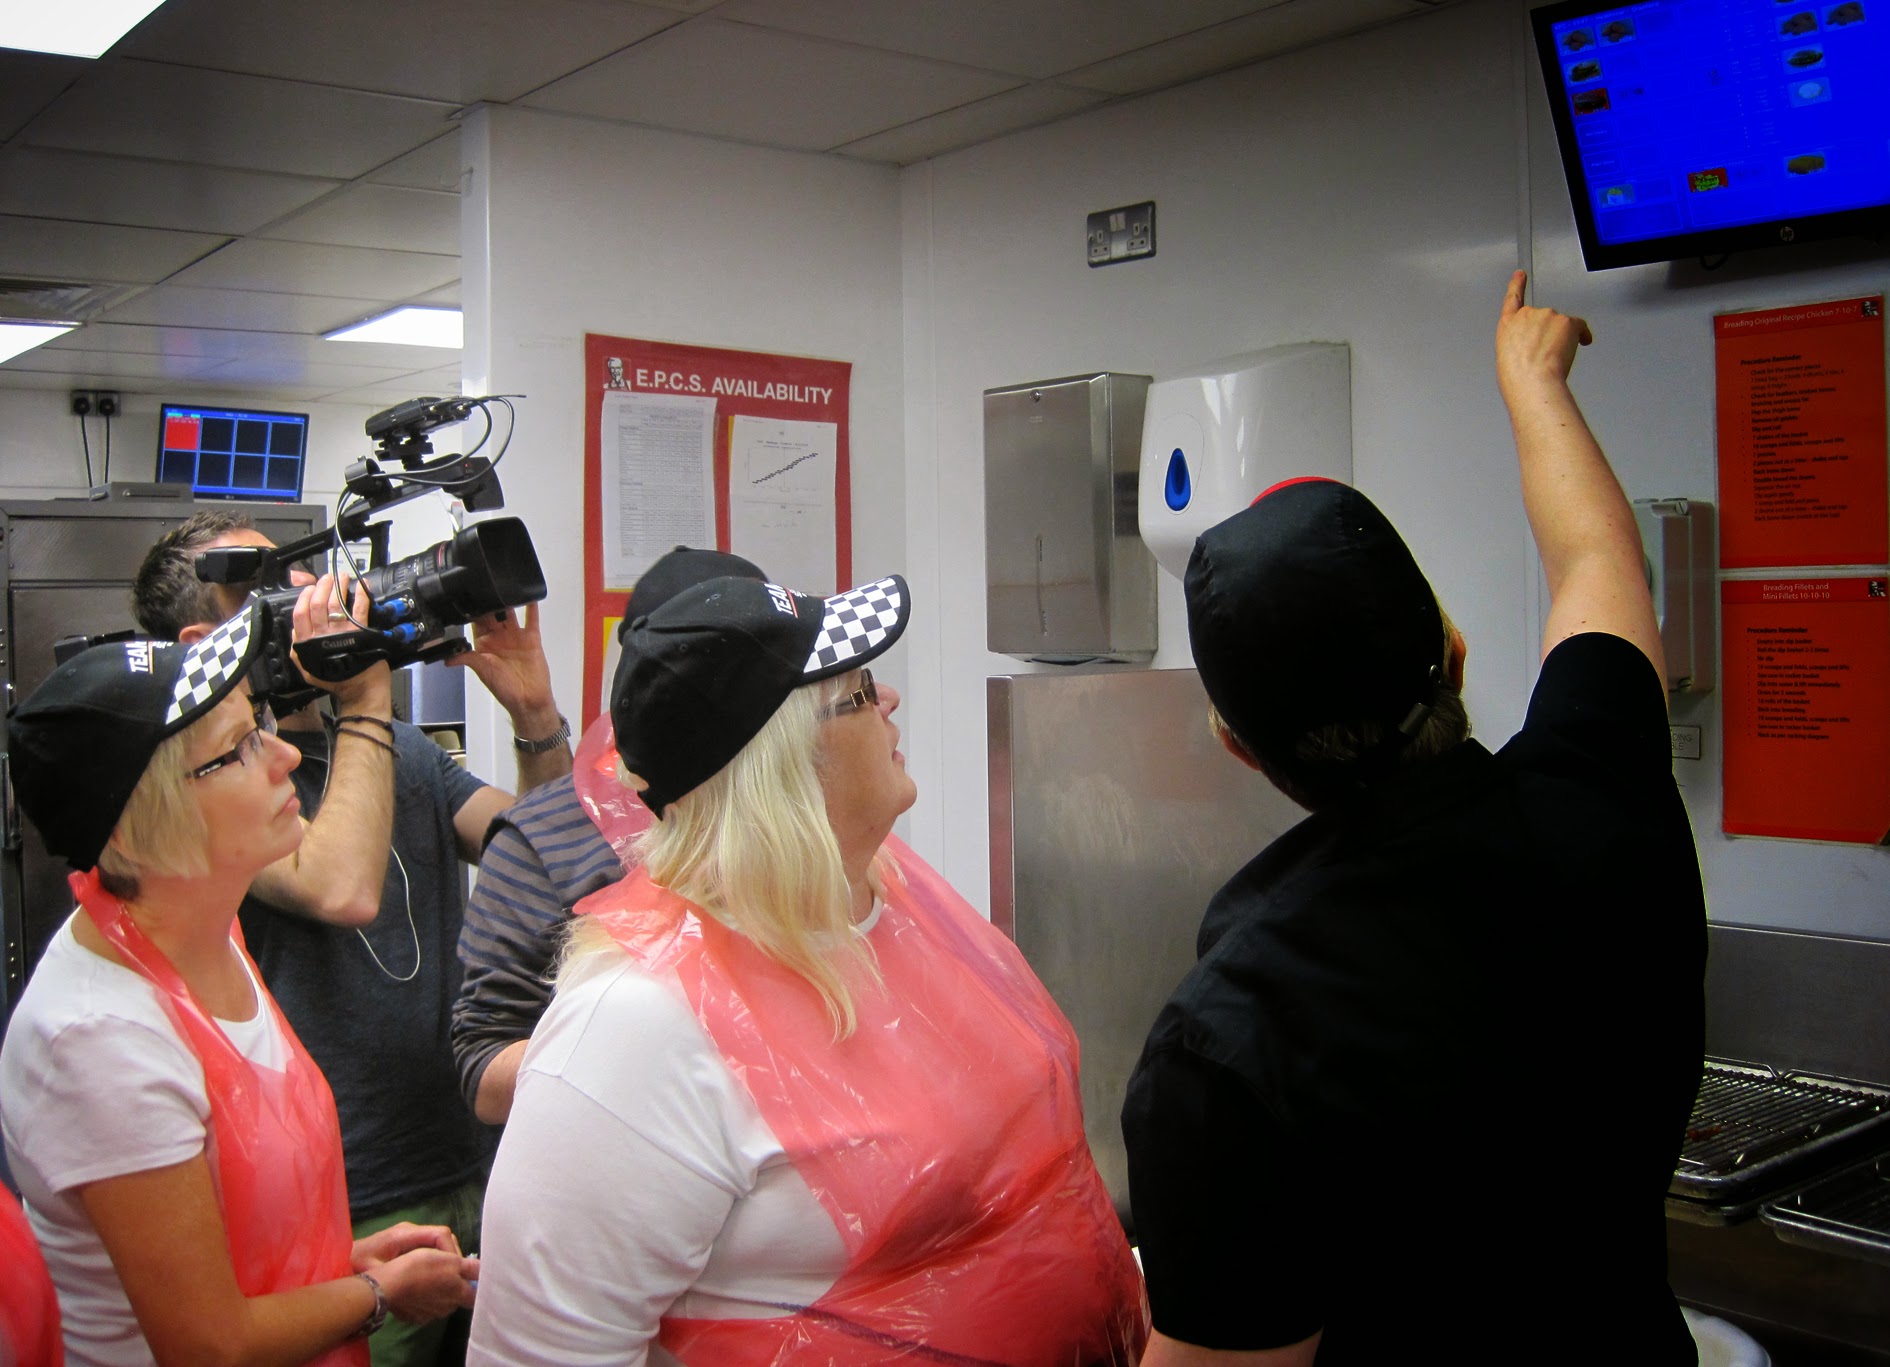 Behind the Scenes at KFC with The BBC Filming